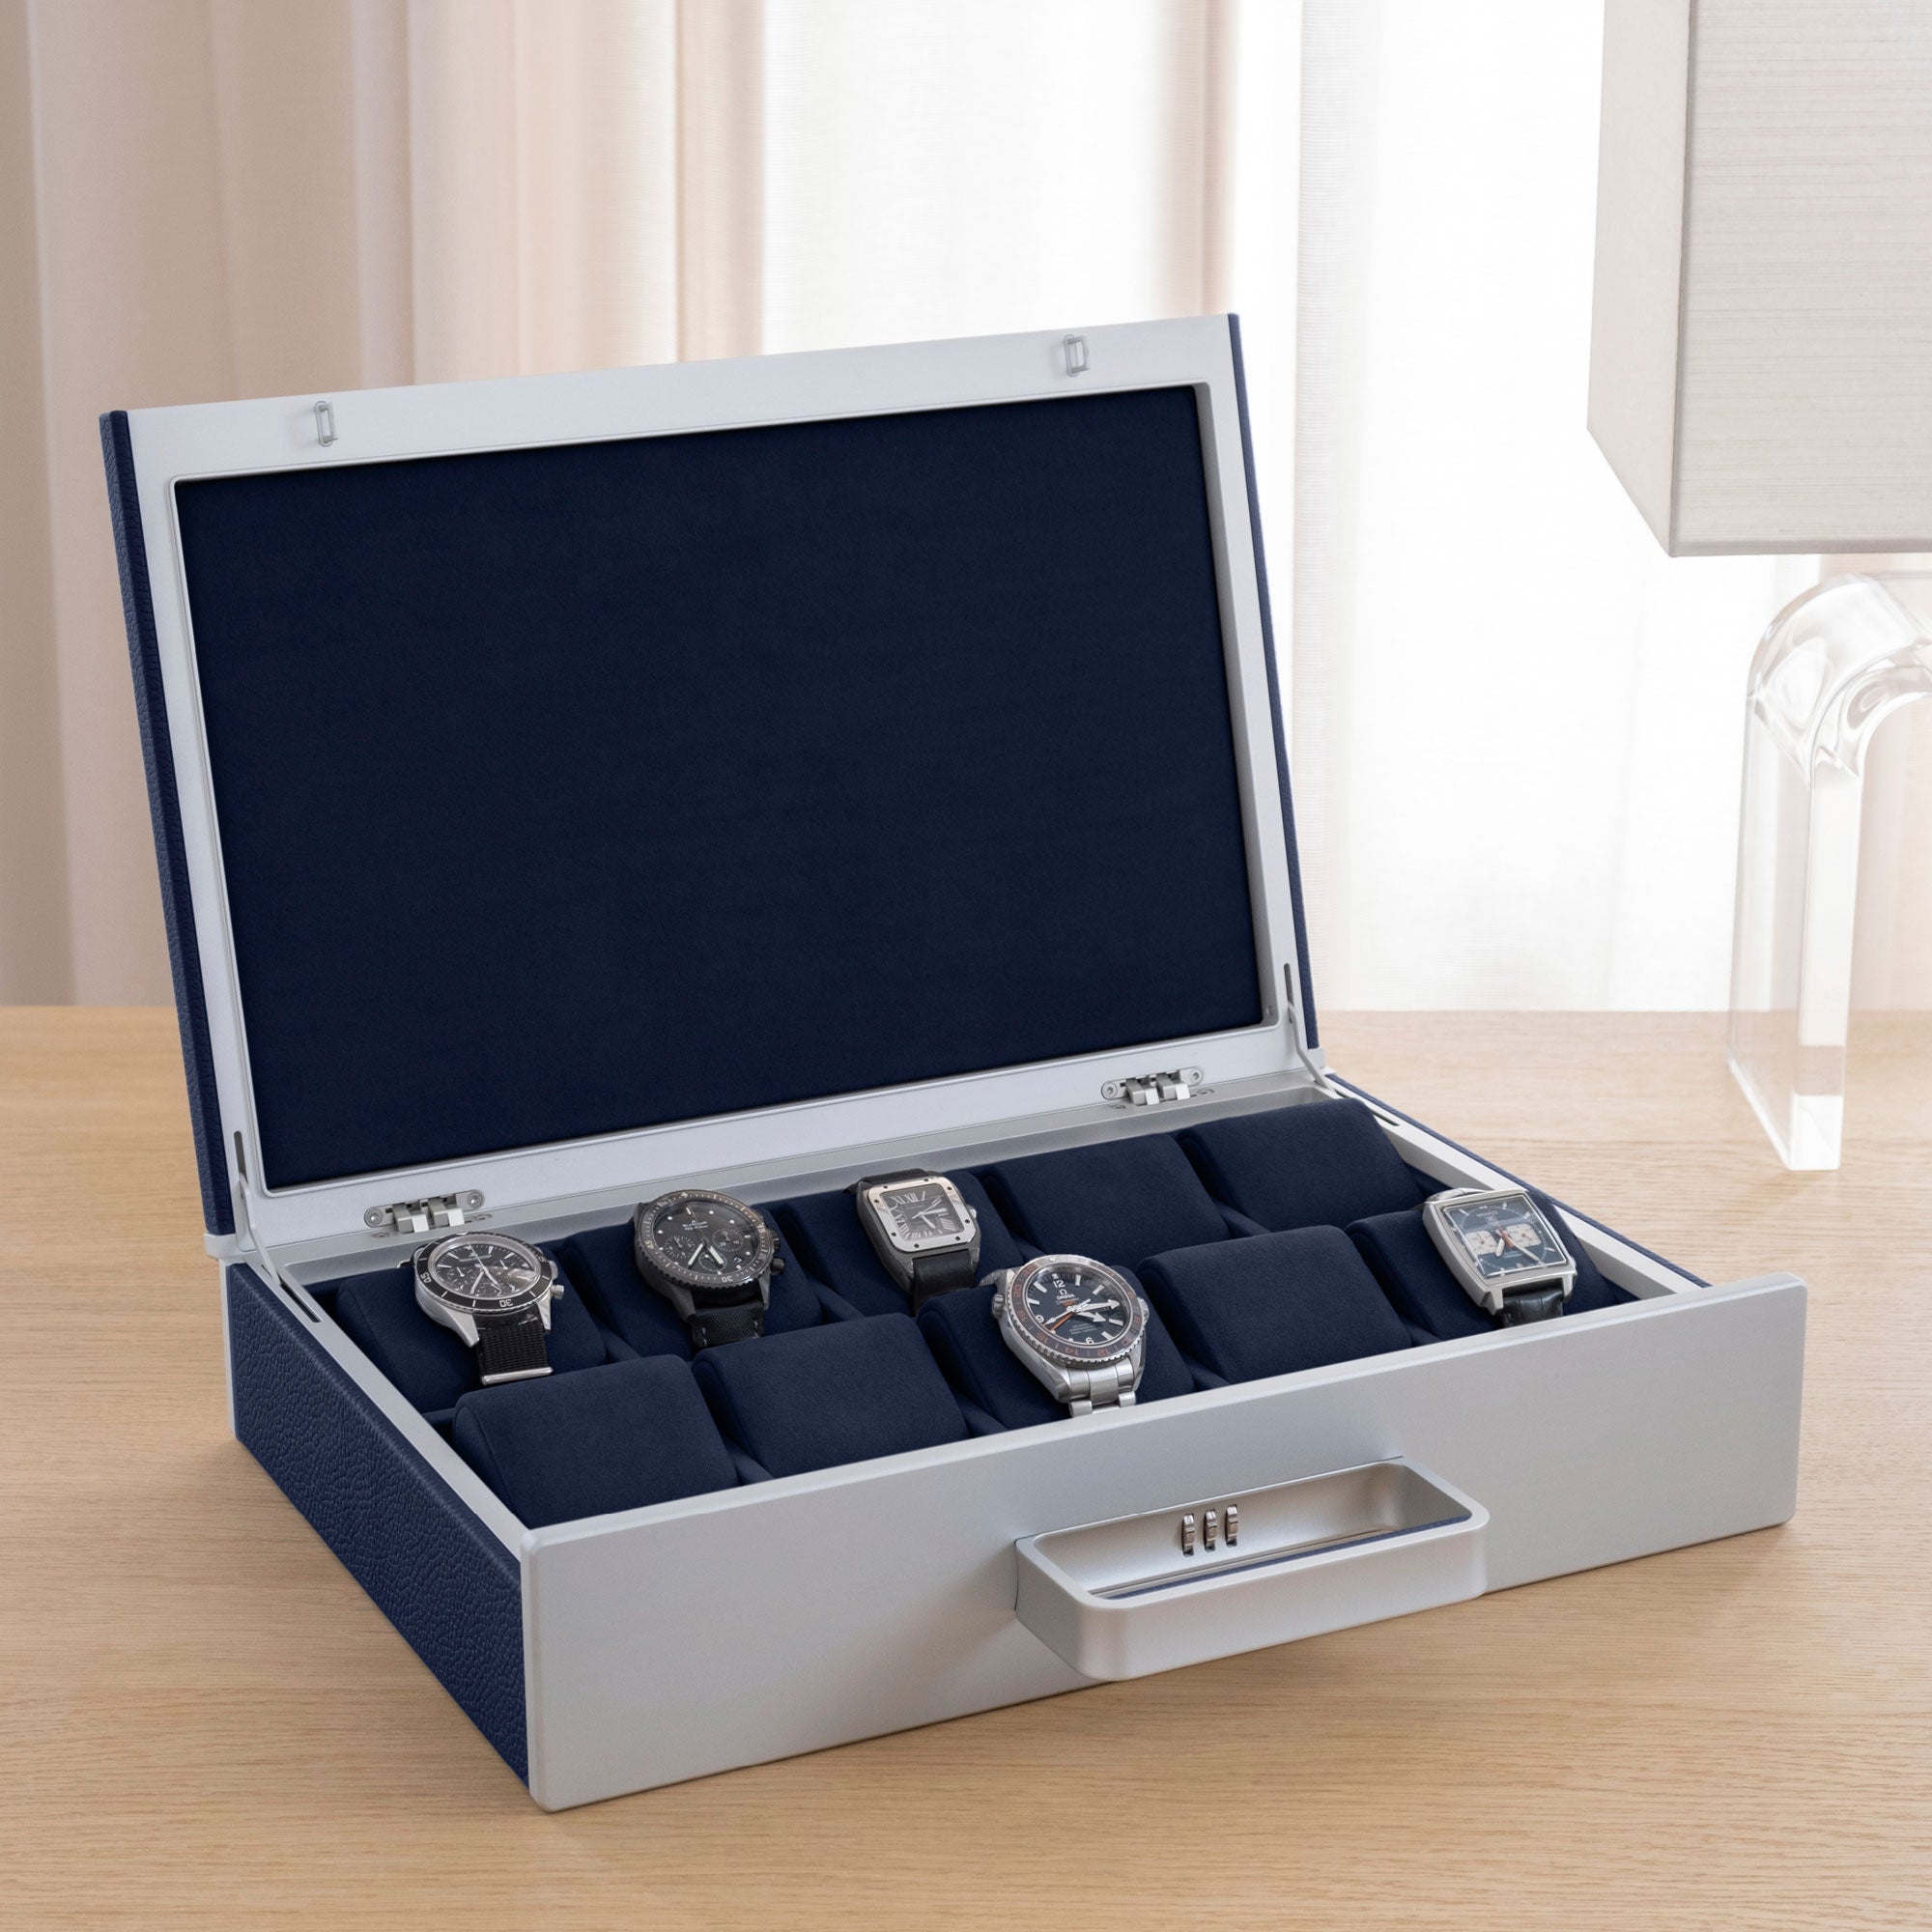 Lifestyle shot of open Mackenzie 10 Watch briefcase in carbon fiber and grey anodized aluminum casing, sapphire leather and soft deep blue Alcantara made by hand filled with luxury watches including Jaeger-LeCoultre, Blancpain and Omega